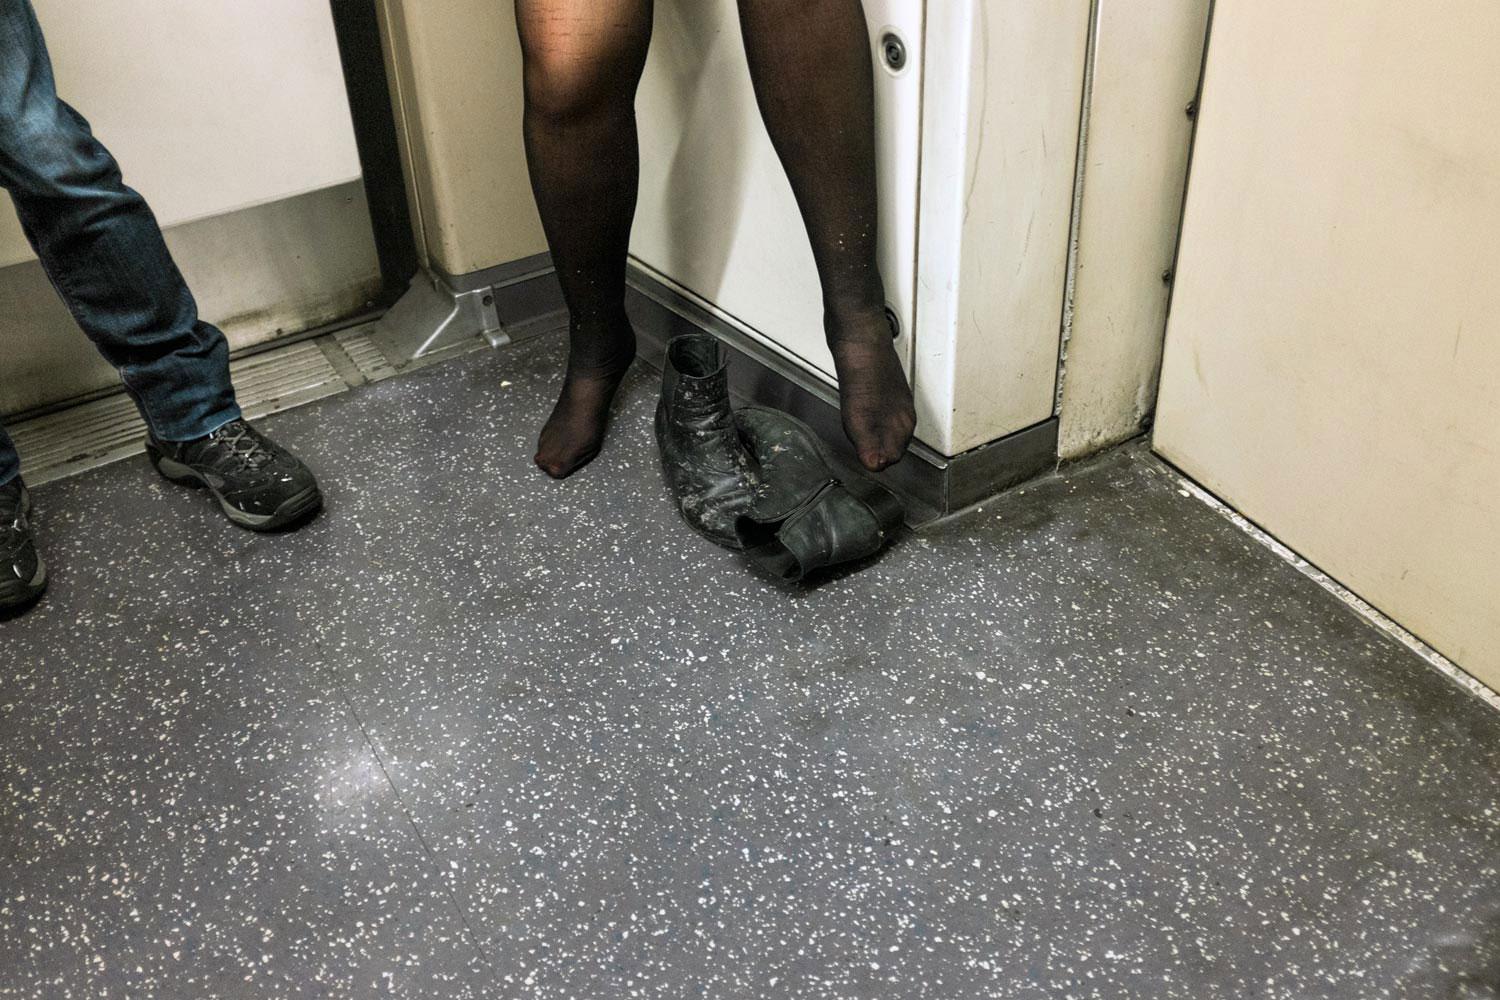 As the night wore on the time for dancing shoes came and went. This woman clearly felt at ease as she rode the Central Line west in the direction of White City.